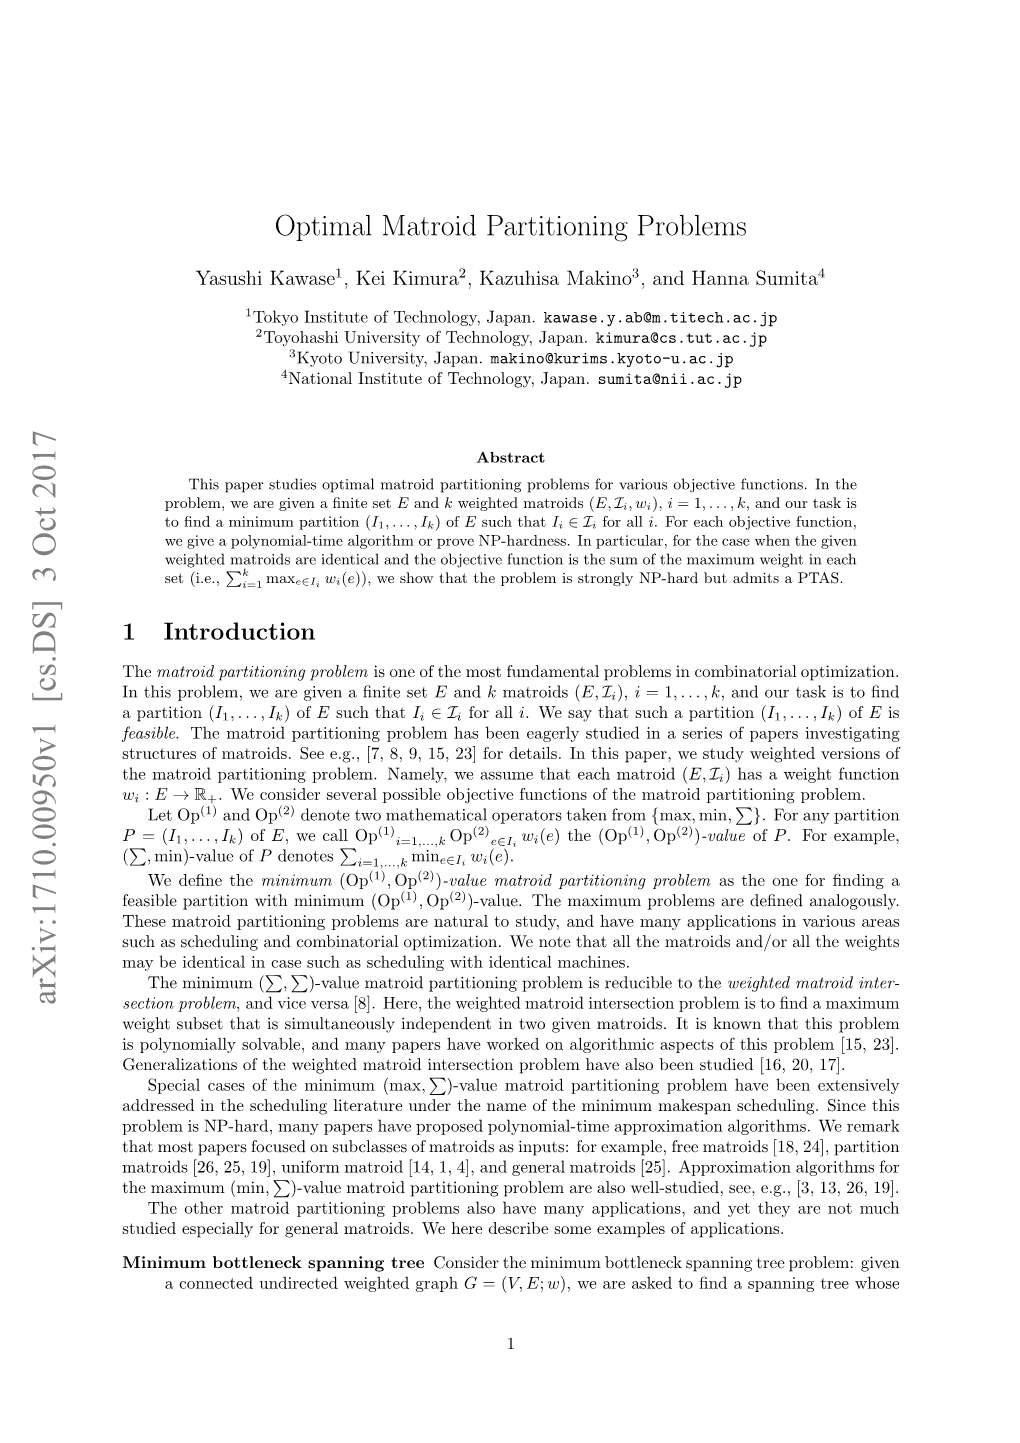 Optimal Matroid Partitioning Problems Where Thep Input Matroids Are Identical Partition Matroids